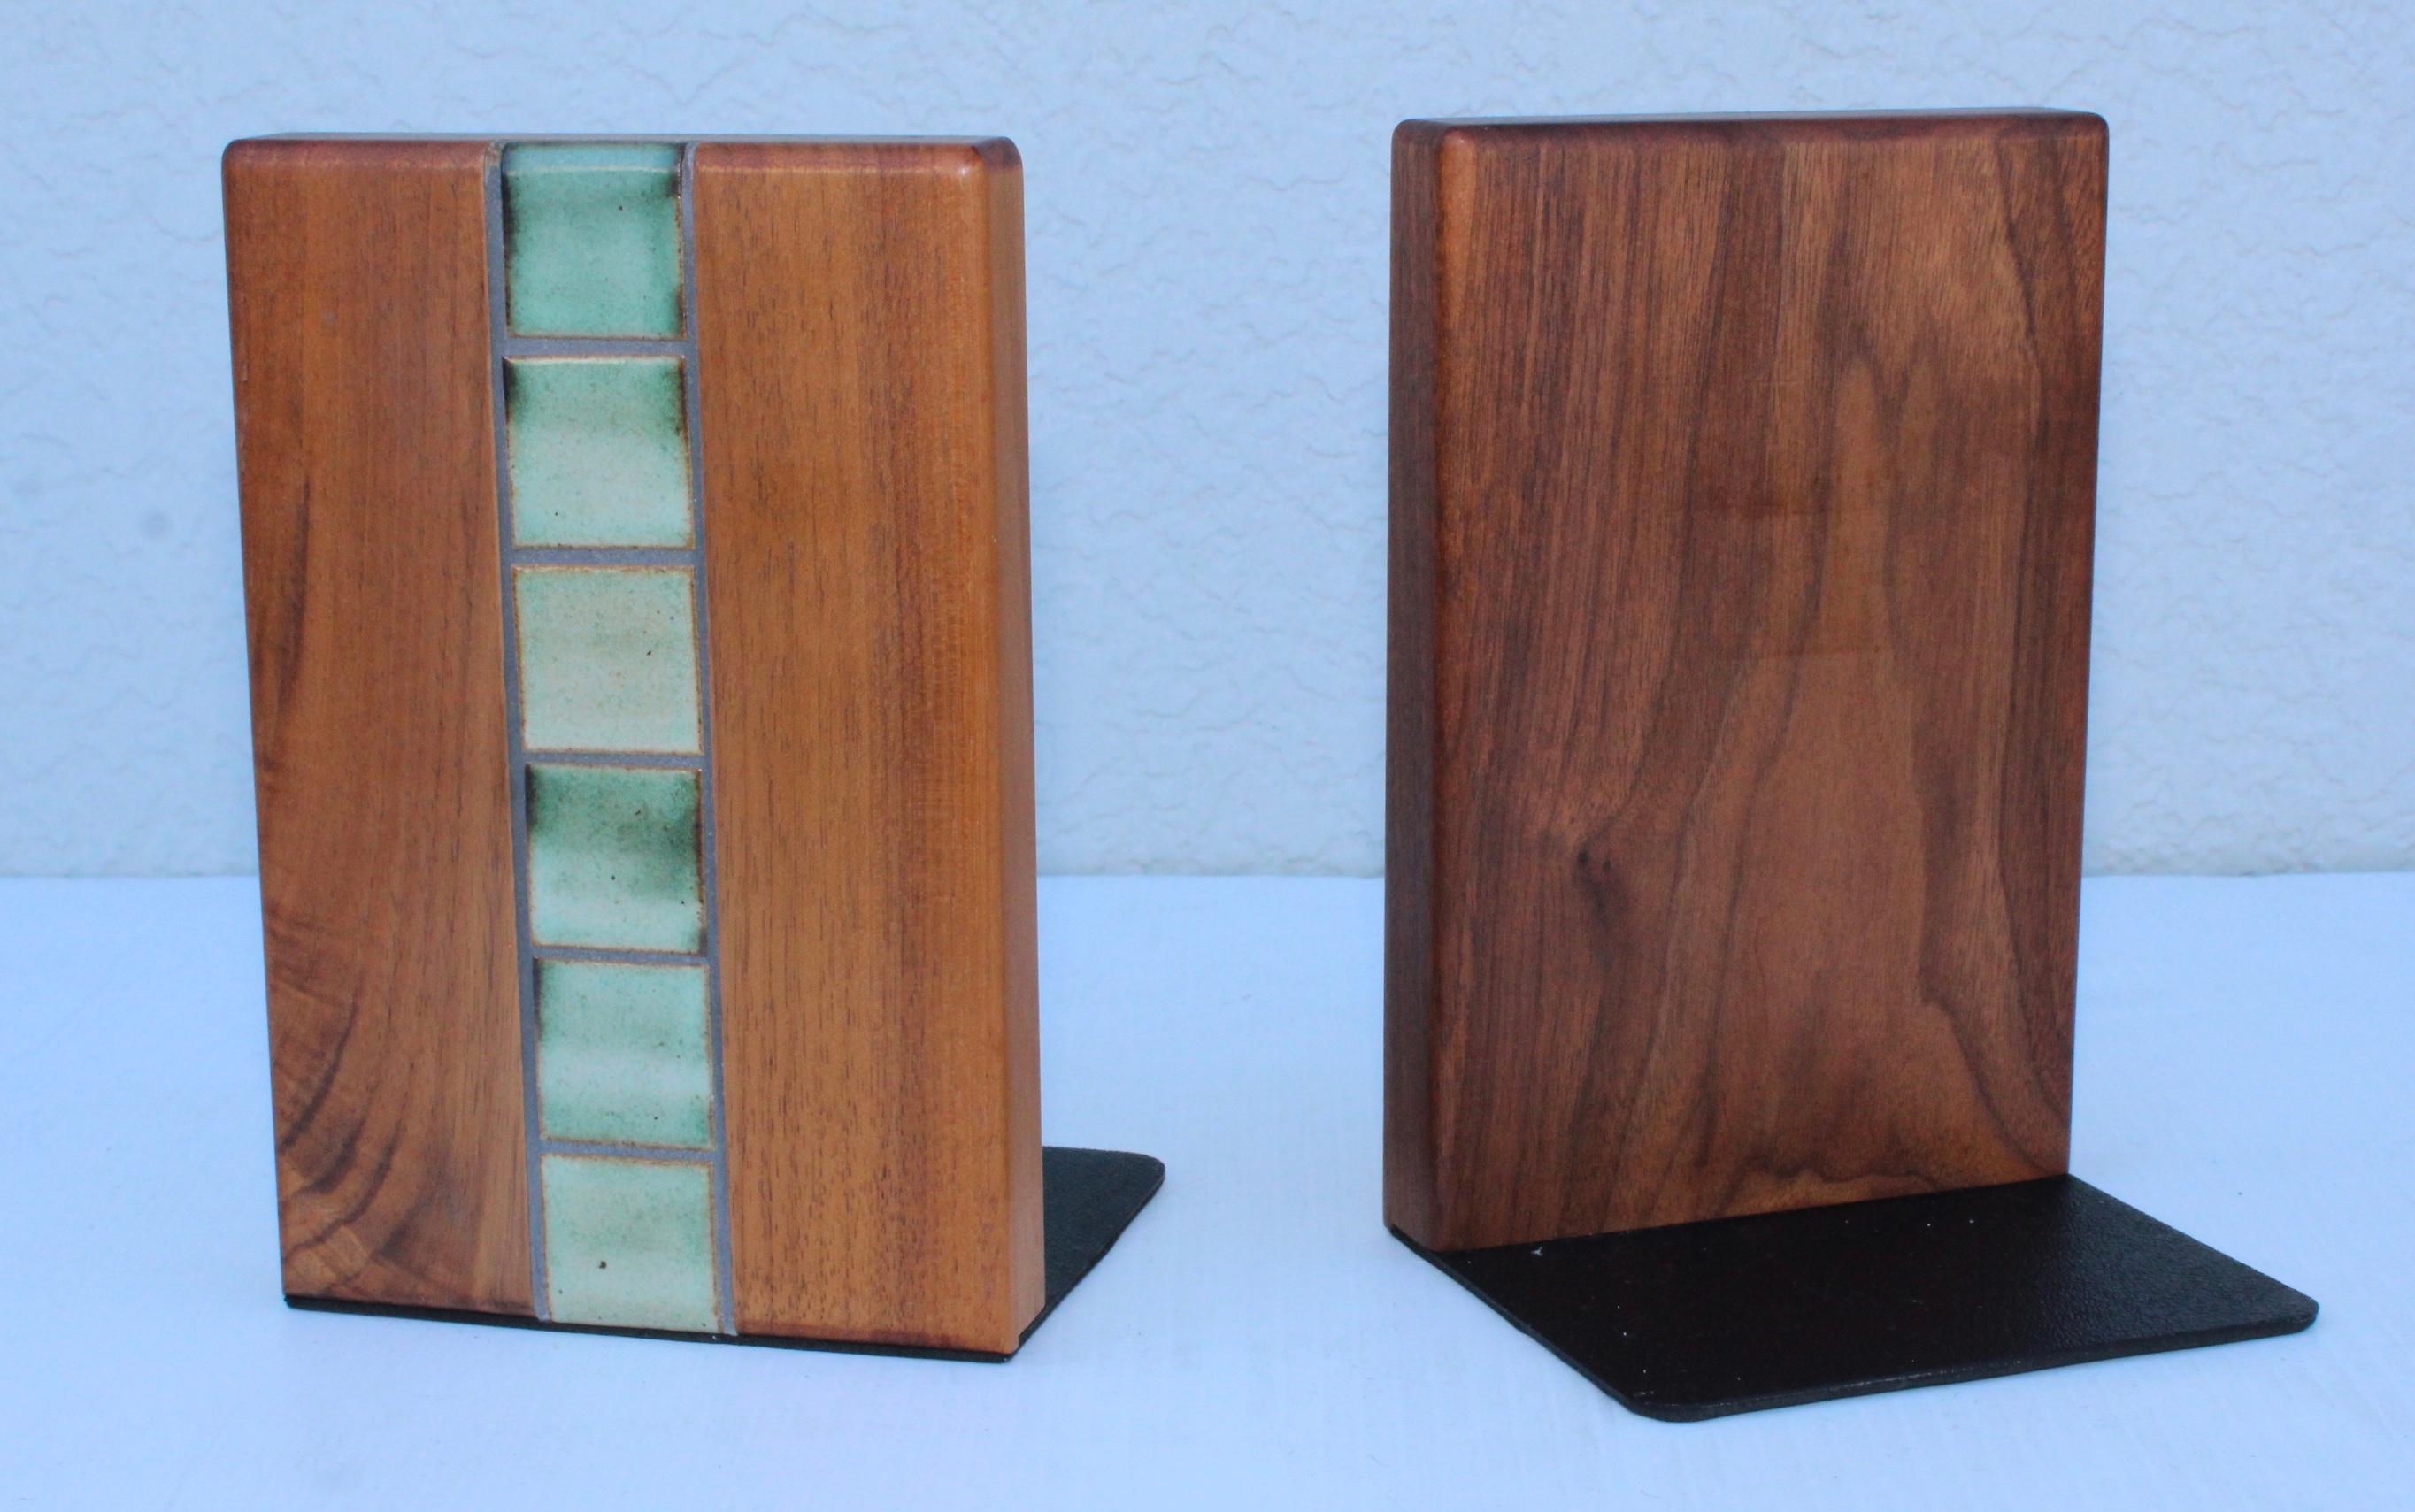 1970's Mid-Century Modern walnut and tile bookends designed by Gordon and Jane Martz, in vintage original condition with some wear and patina due to age and use.